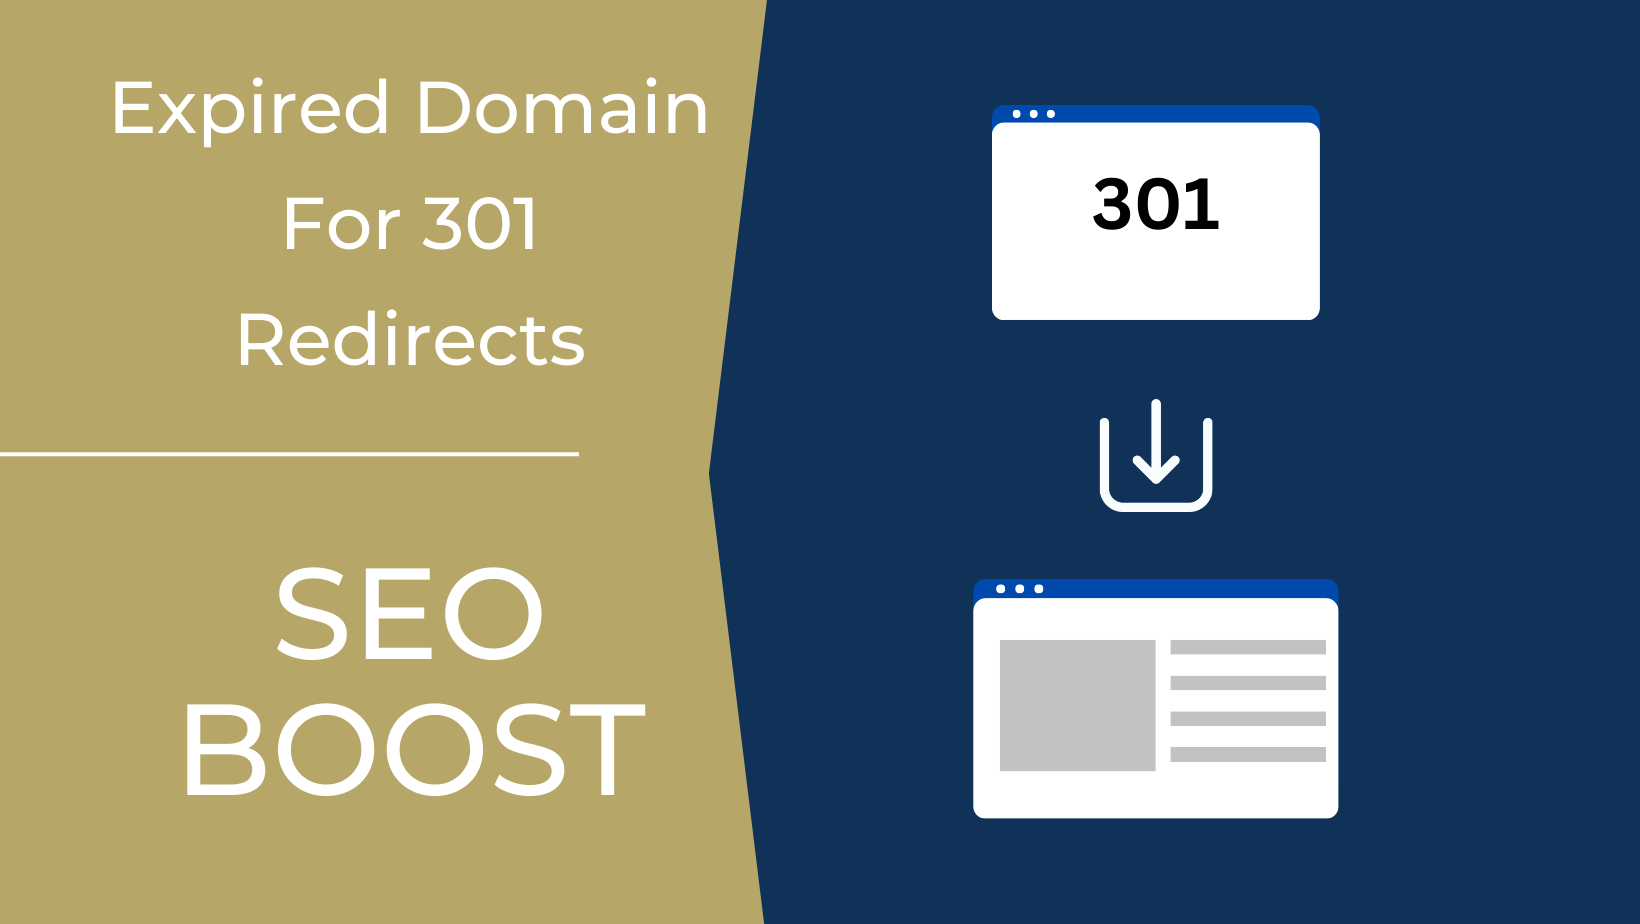 How To Use Expired Domains For 301 Redirect And Gain SEO Boost